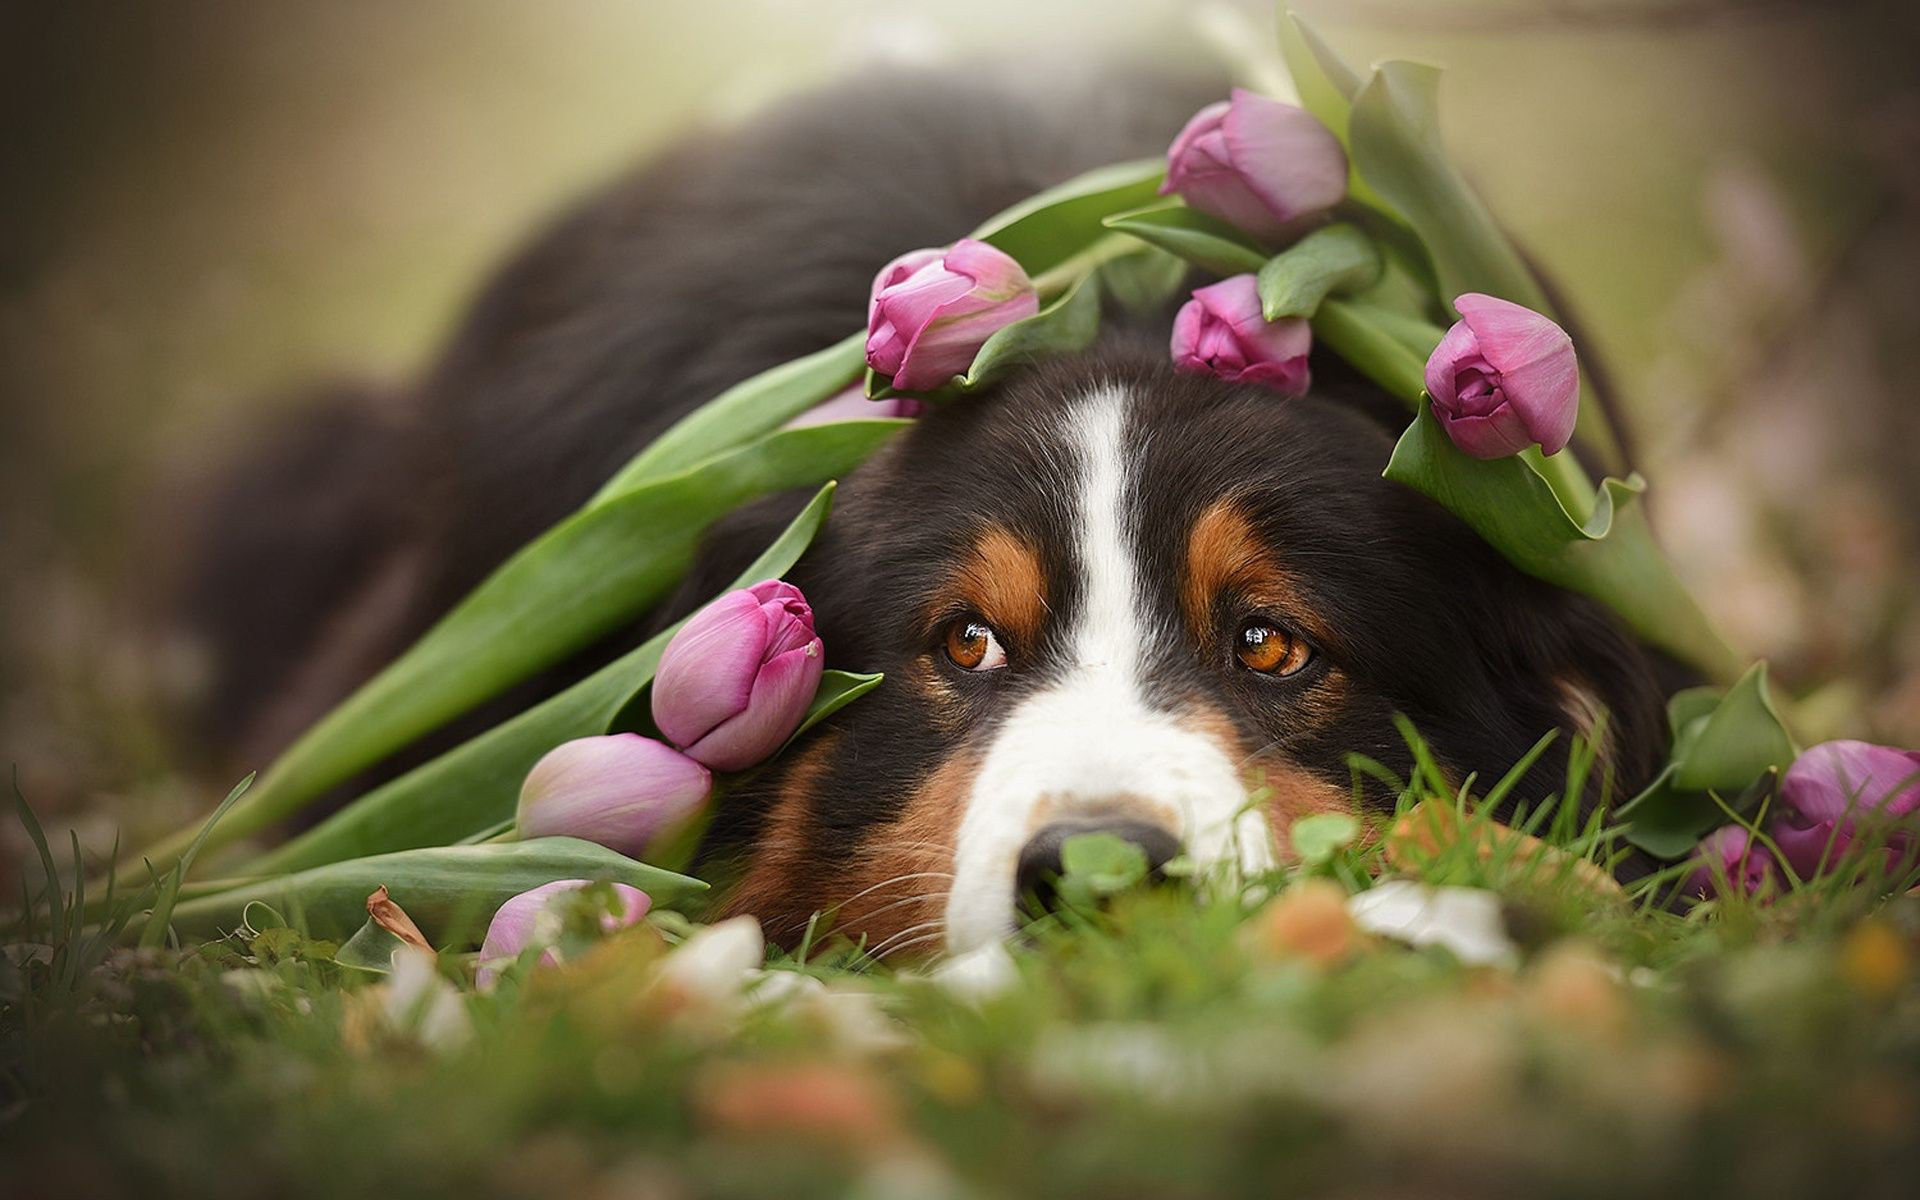 10 Best Spring Wallpaper Dog You Can Save It Without A Penny